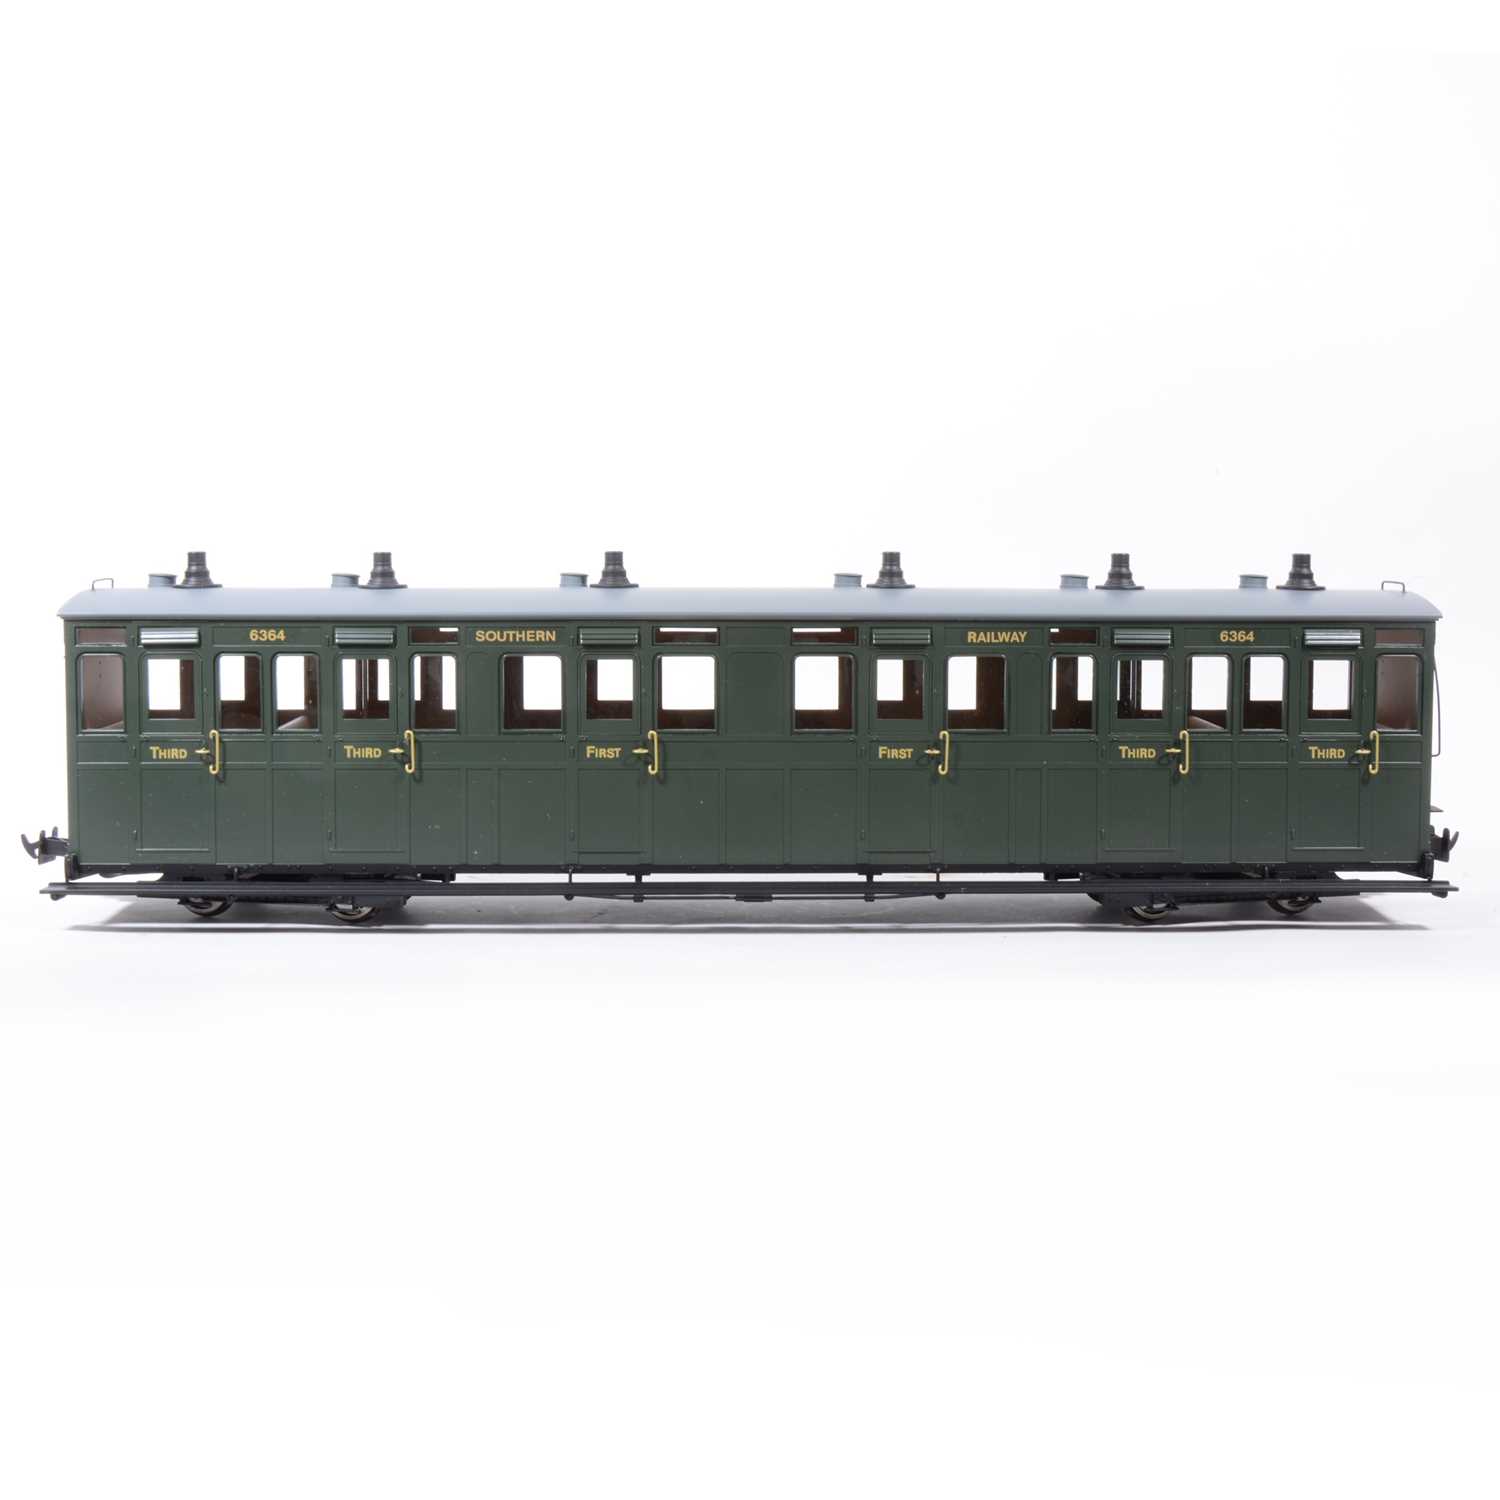 Lot 63 - Accucraft G scale passenger coaches, Lynton & Barnst bogie R19-20, R19-21, R19-19, and a W&L Pickering coaches no.6338, all boxed.